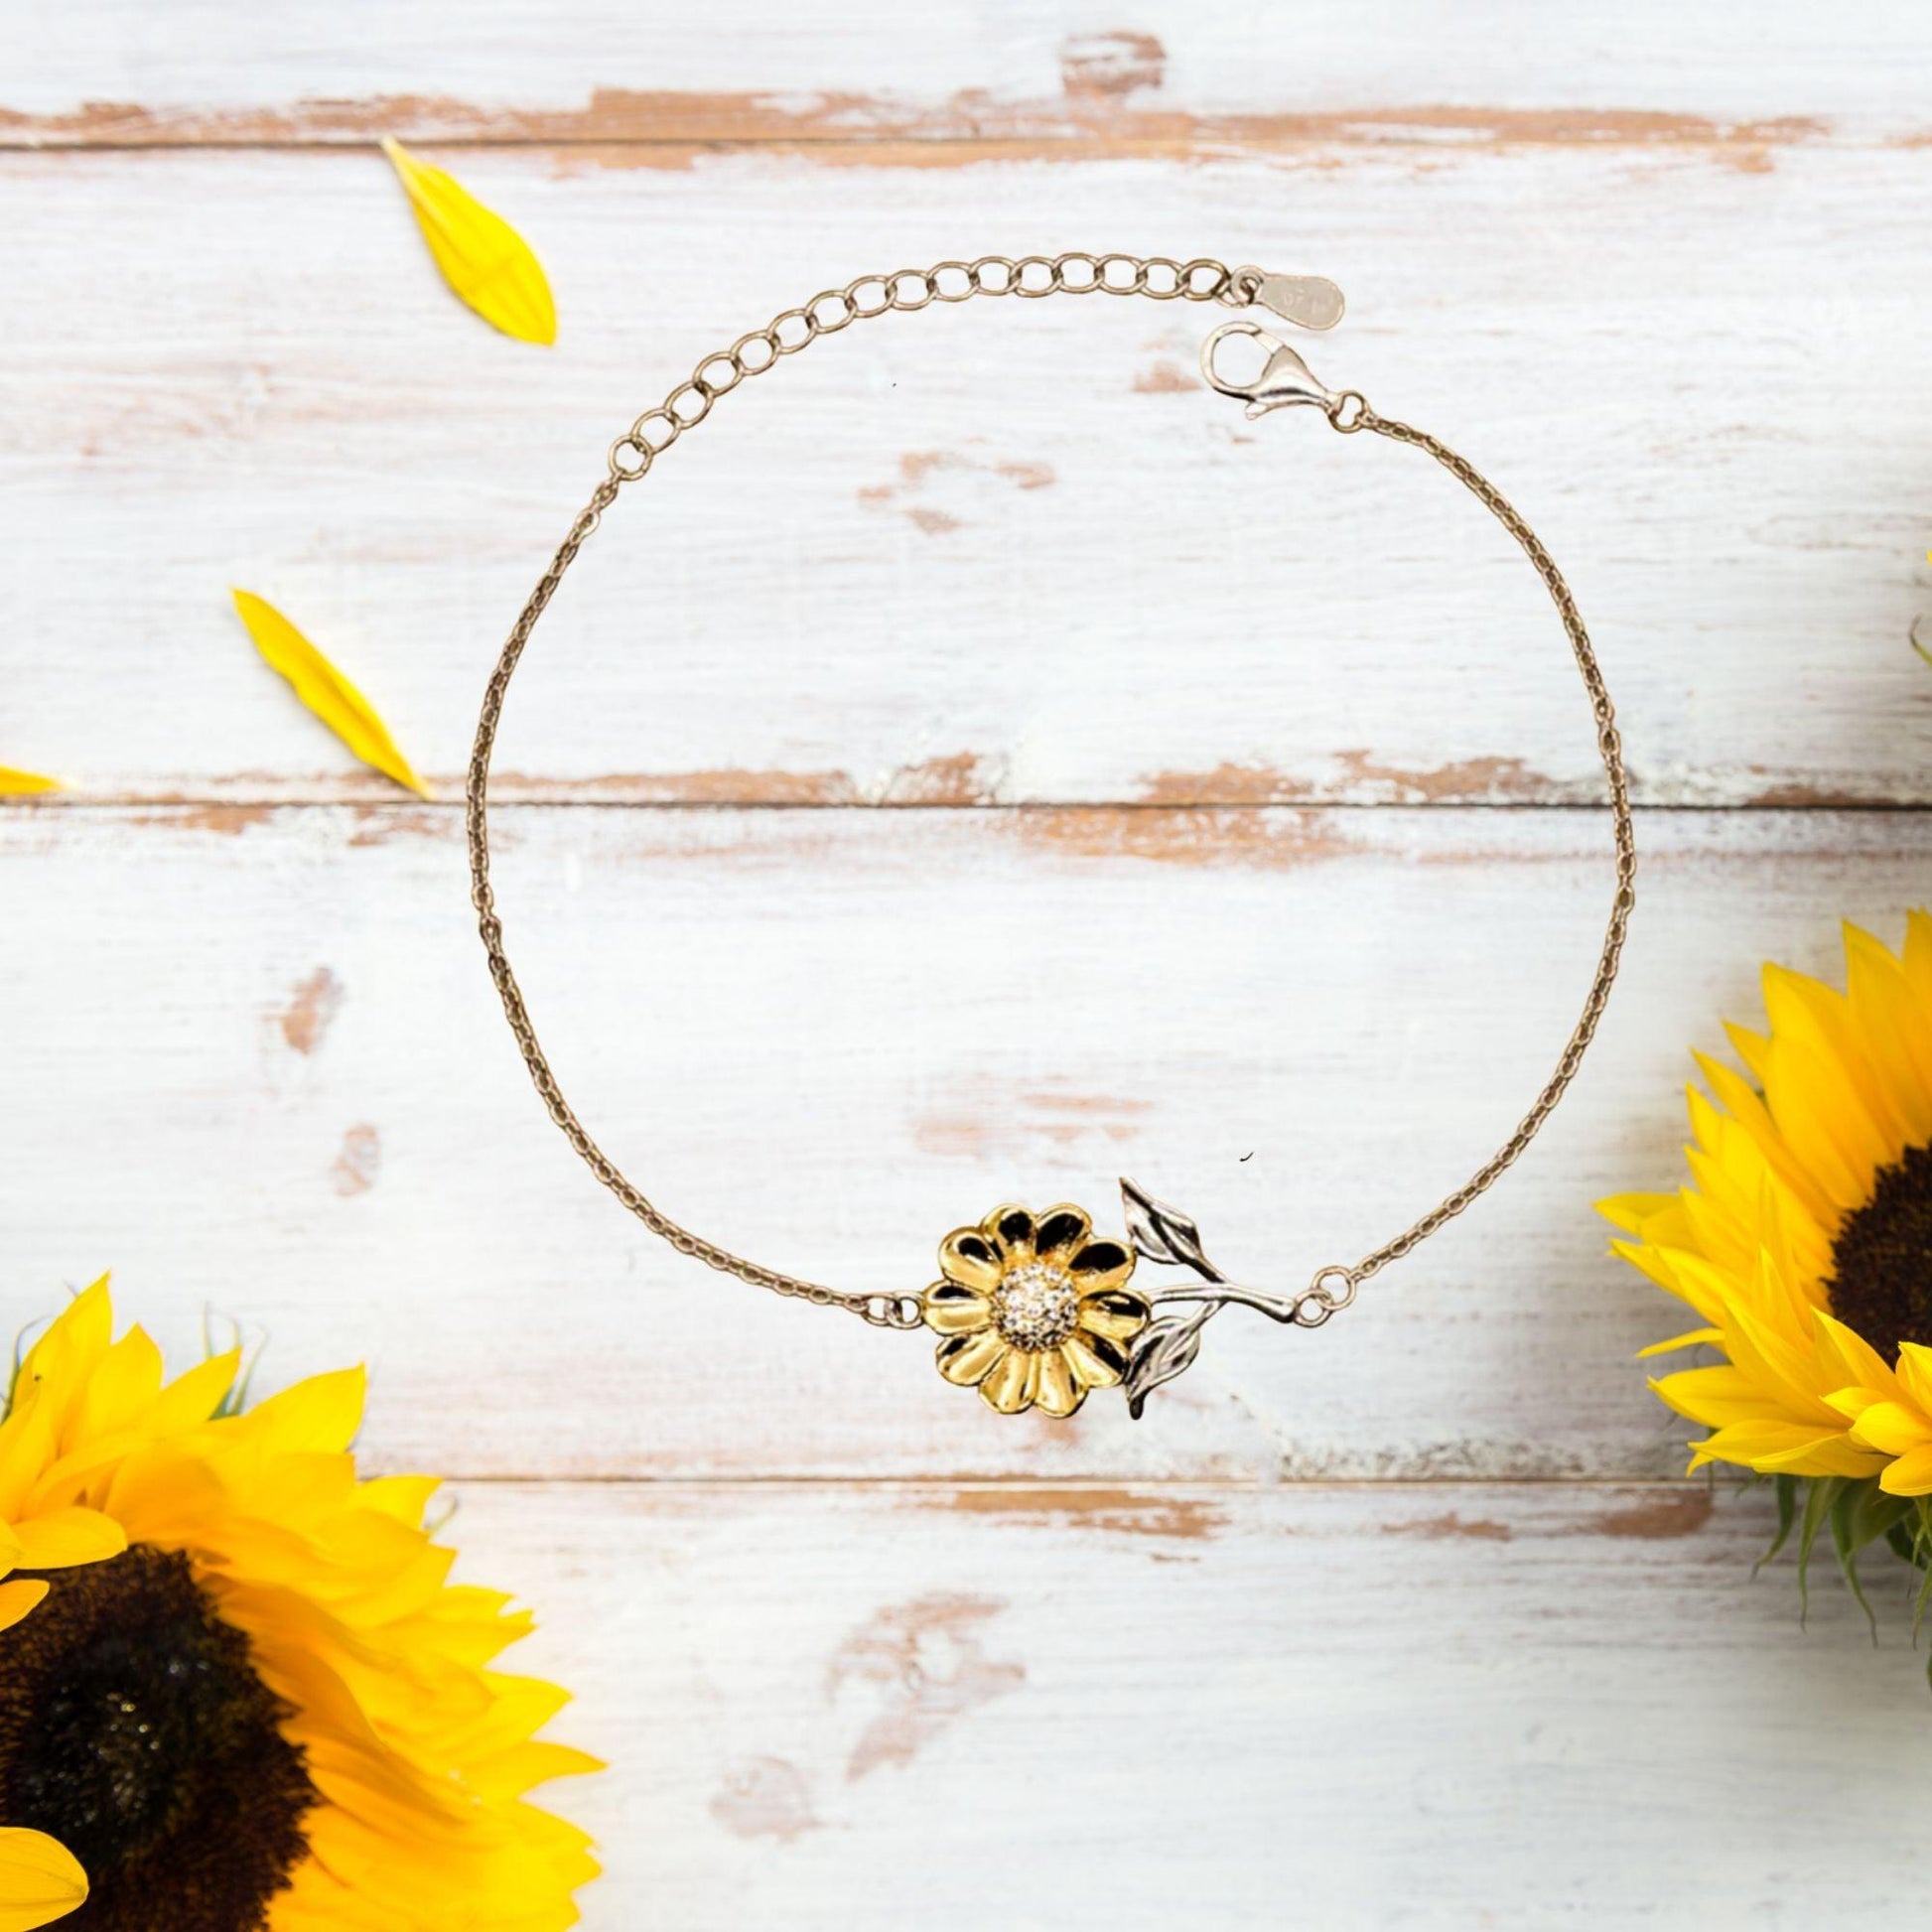 Barber Sunflower Bracelet - Thanks for being who you are - Birthday Christmas Jewelry Gifts Coworkers Colleague Boss - Mallard Moon Gift Shop